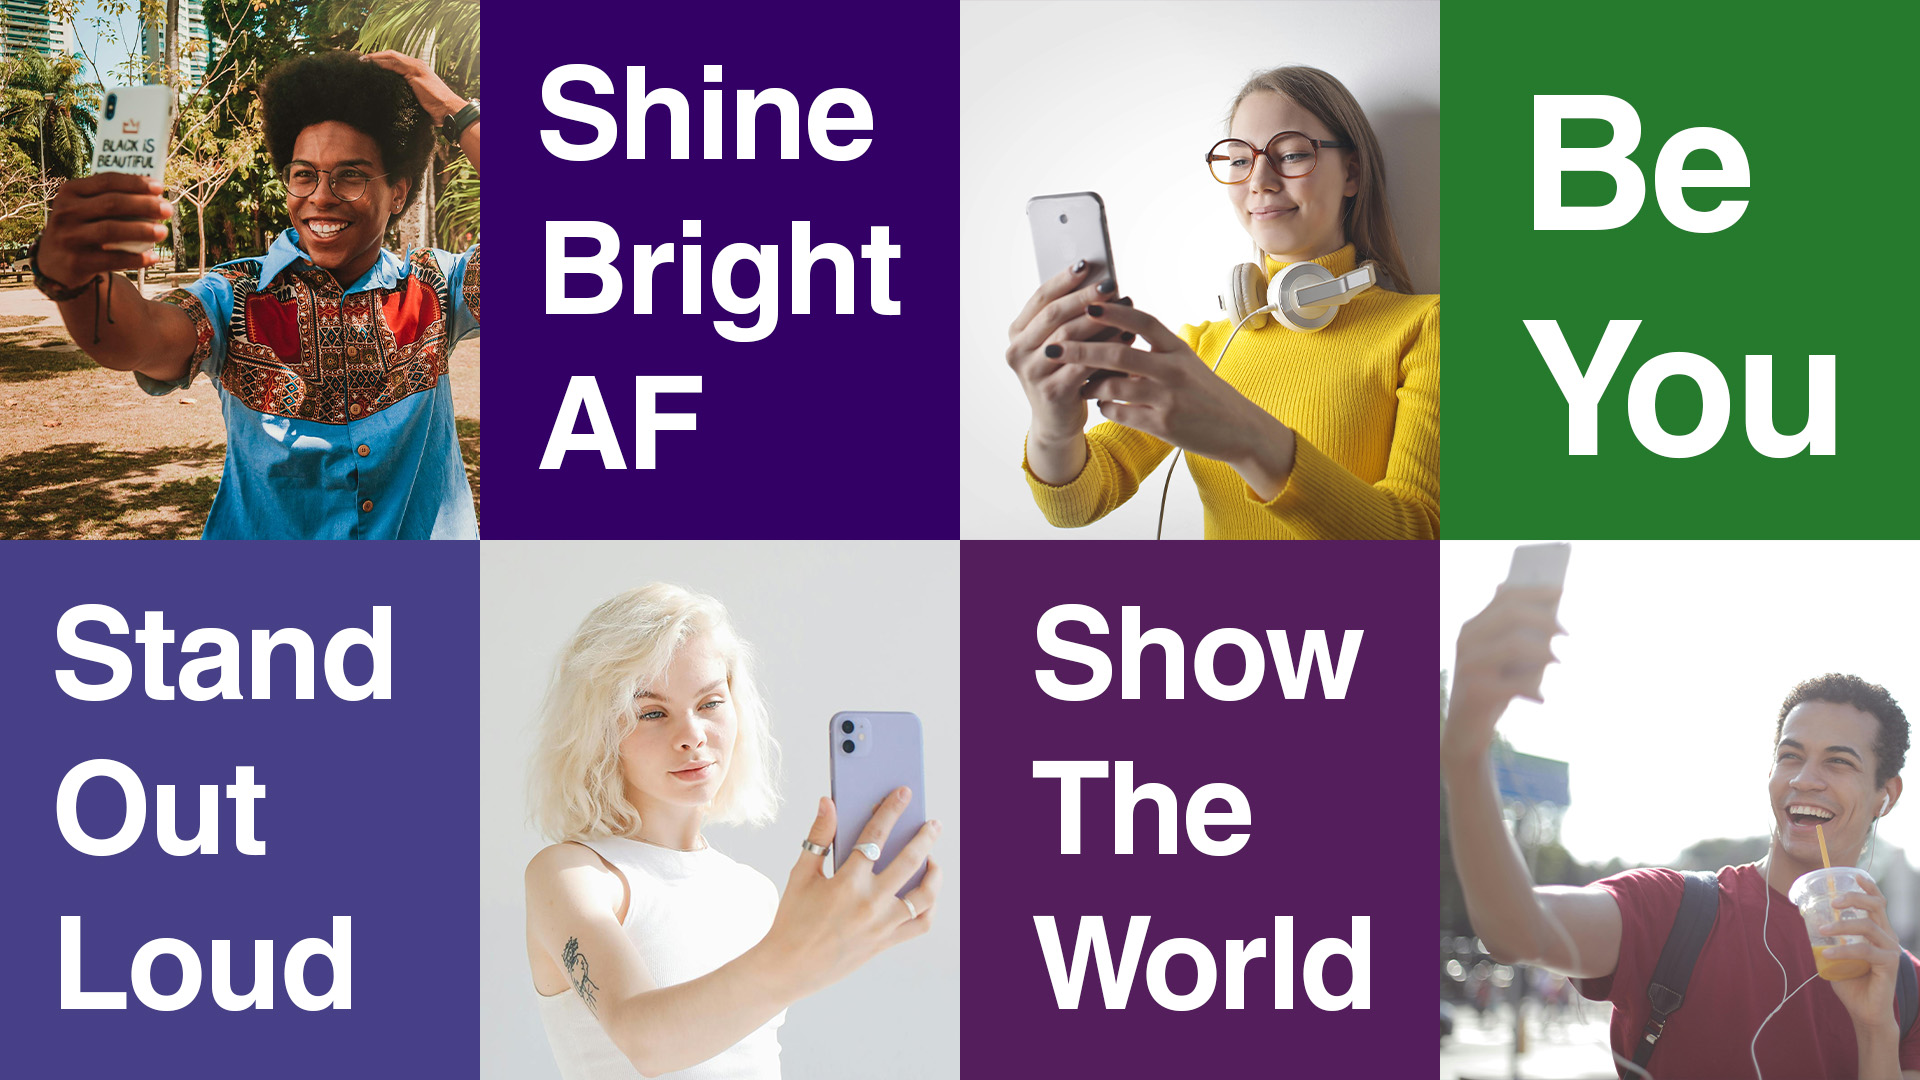 Four people, each with a unique phone case, shine bright af, stand out loud, show the world, be you.